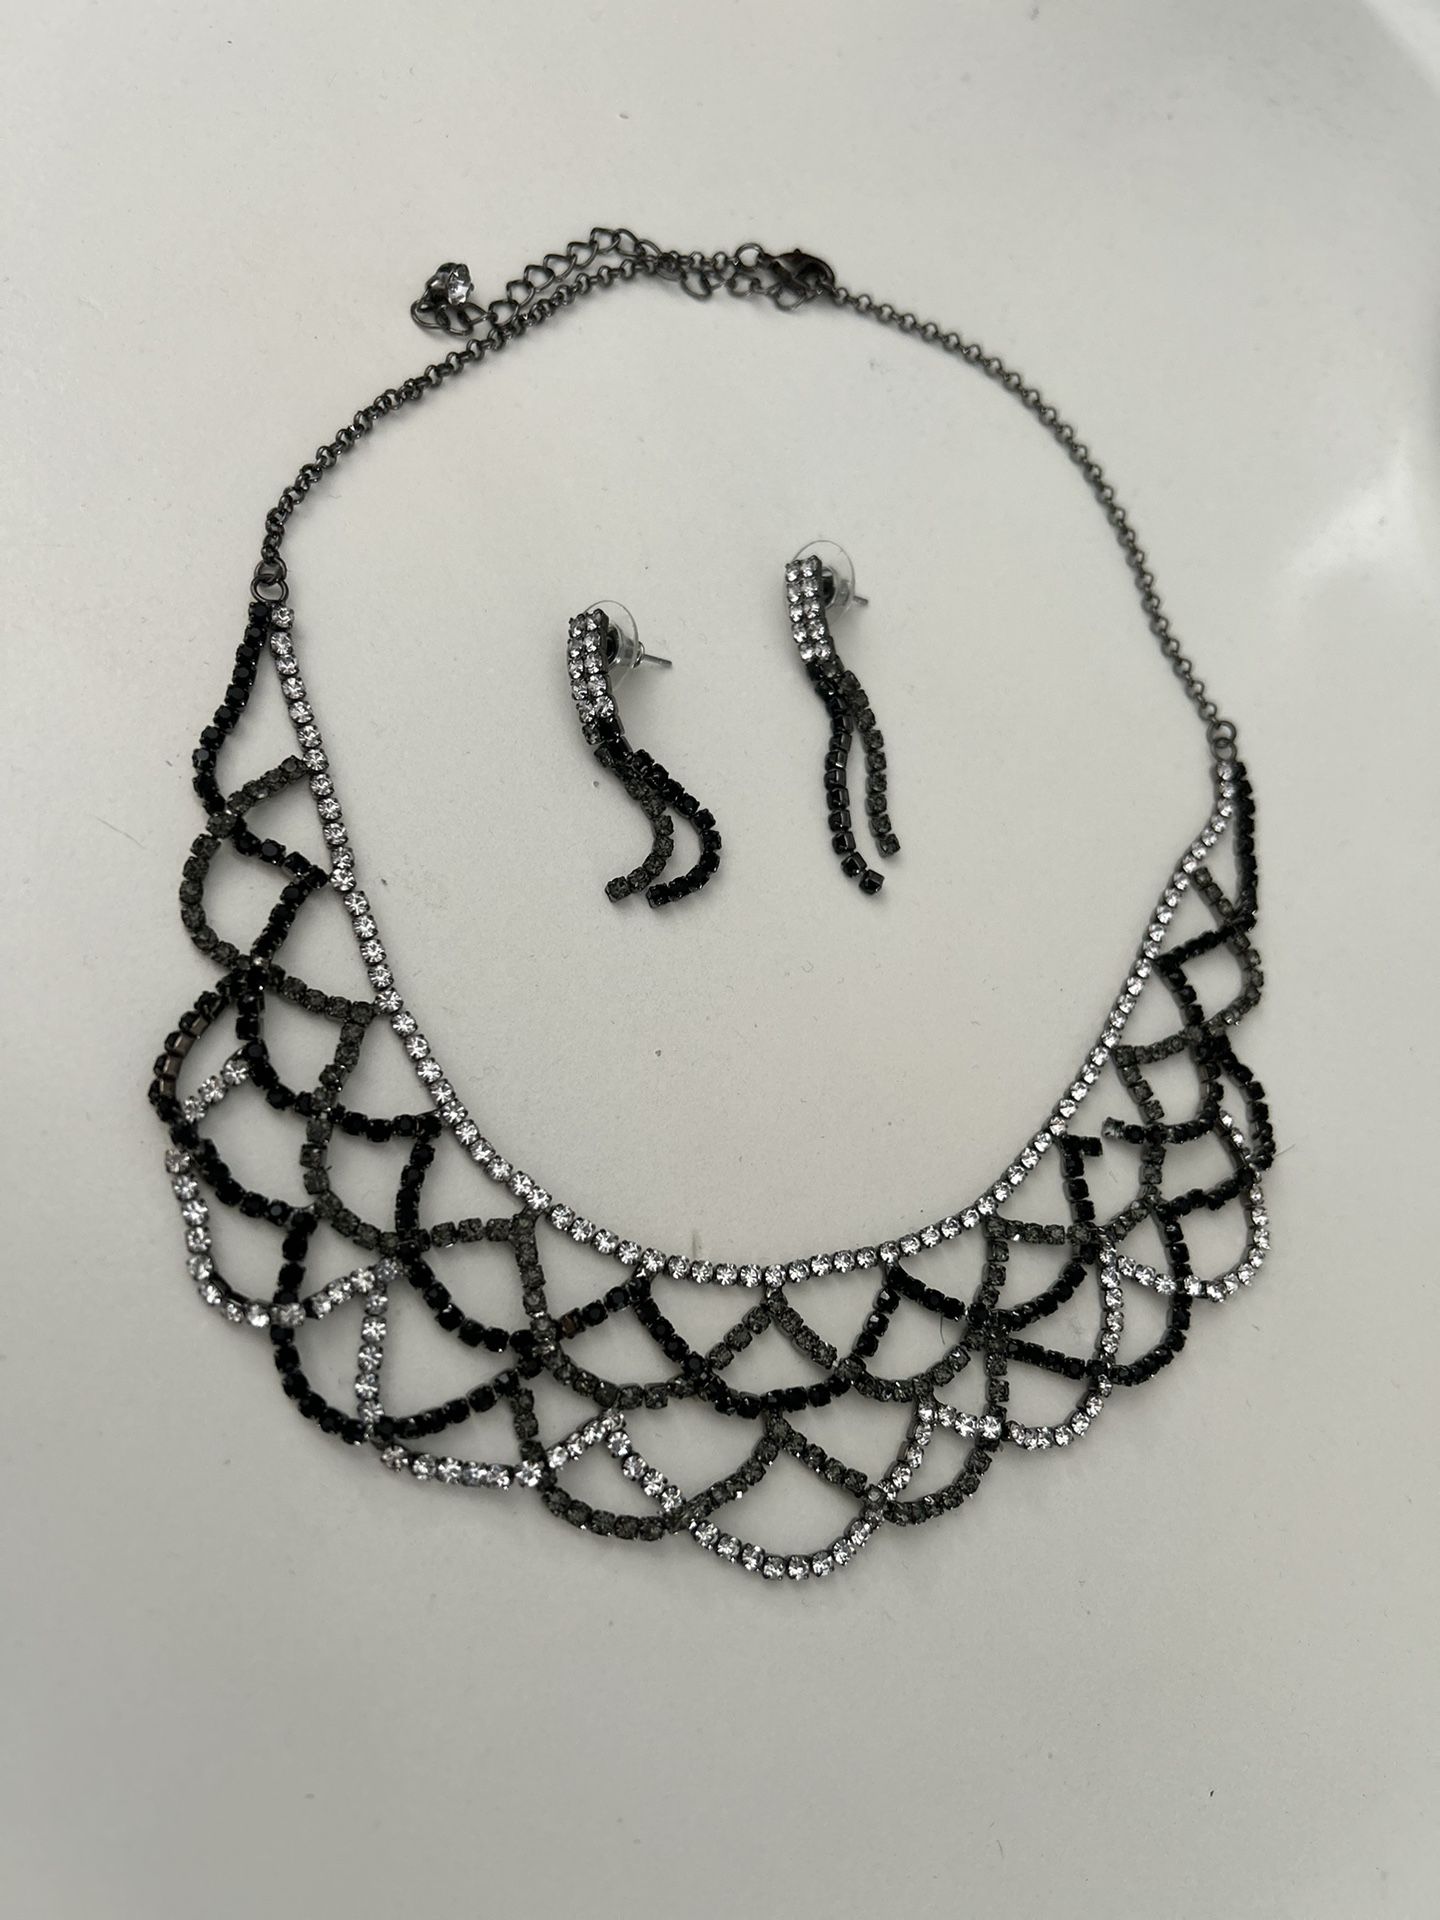 Jewelry Necklace And Earrings 